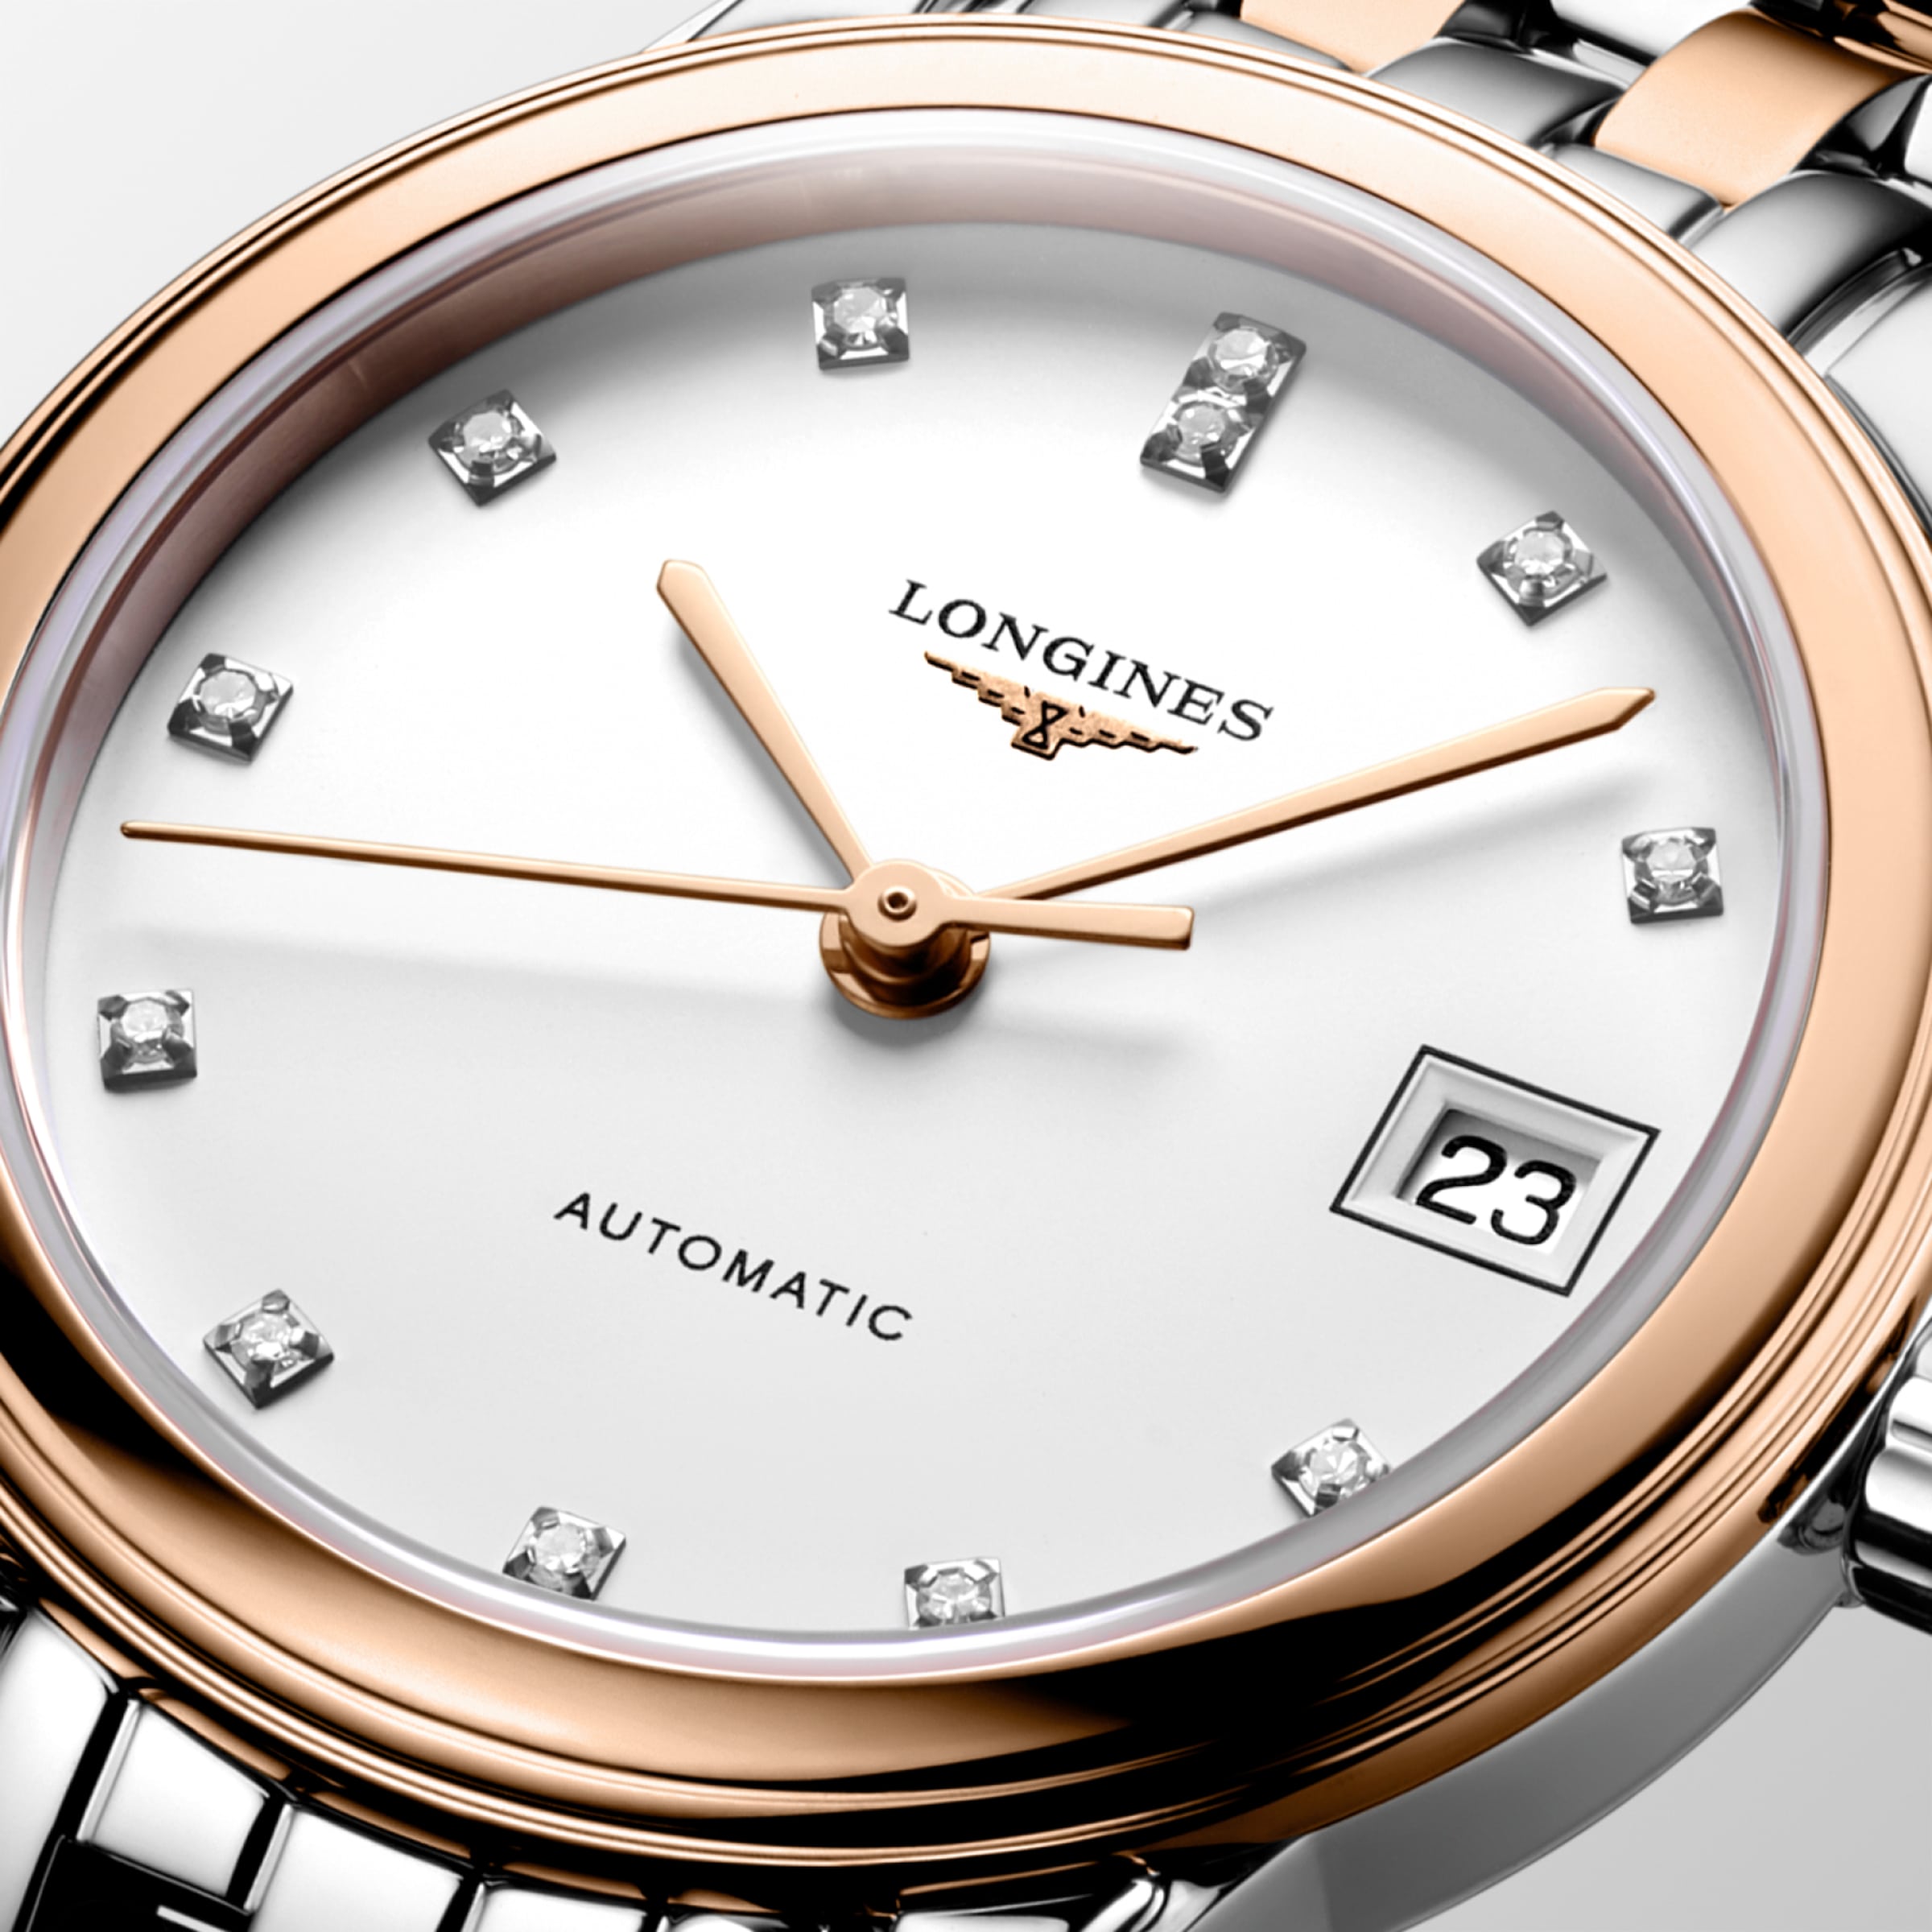 Longines FLAGSHIP Automatic Stainless steel and red PVD coating Watch - L4.274.3.99.7